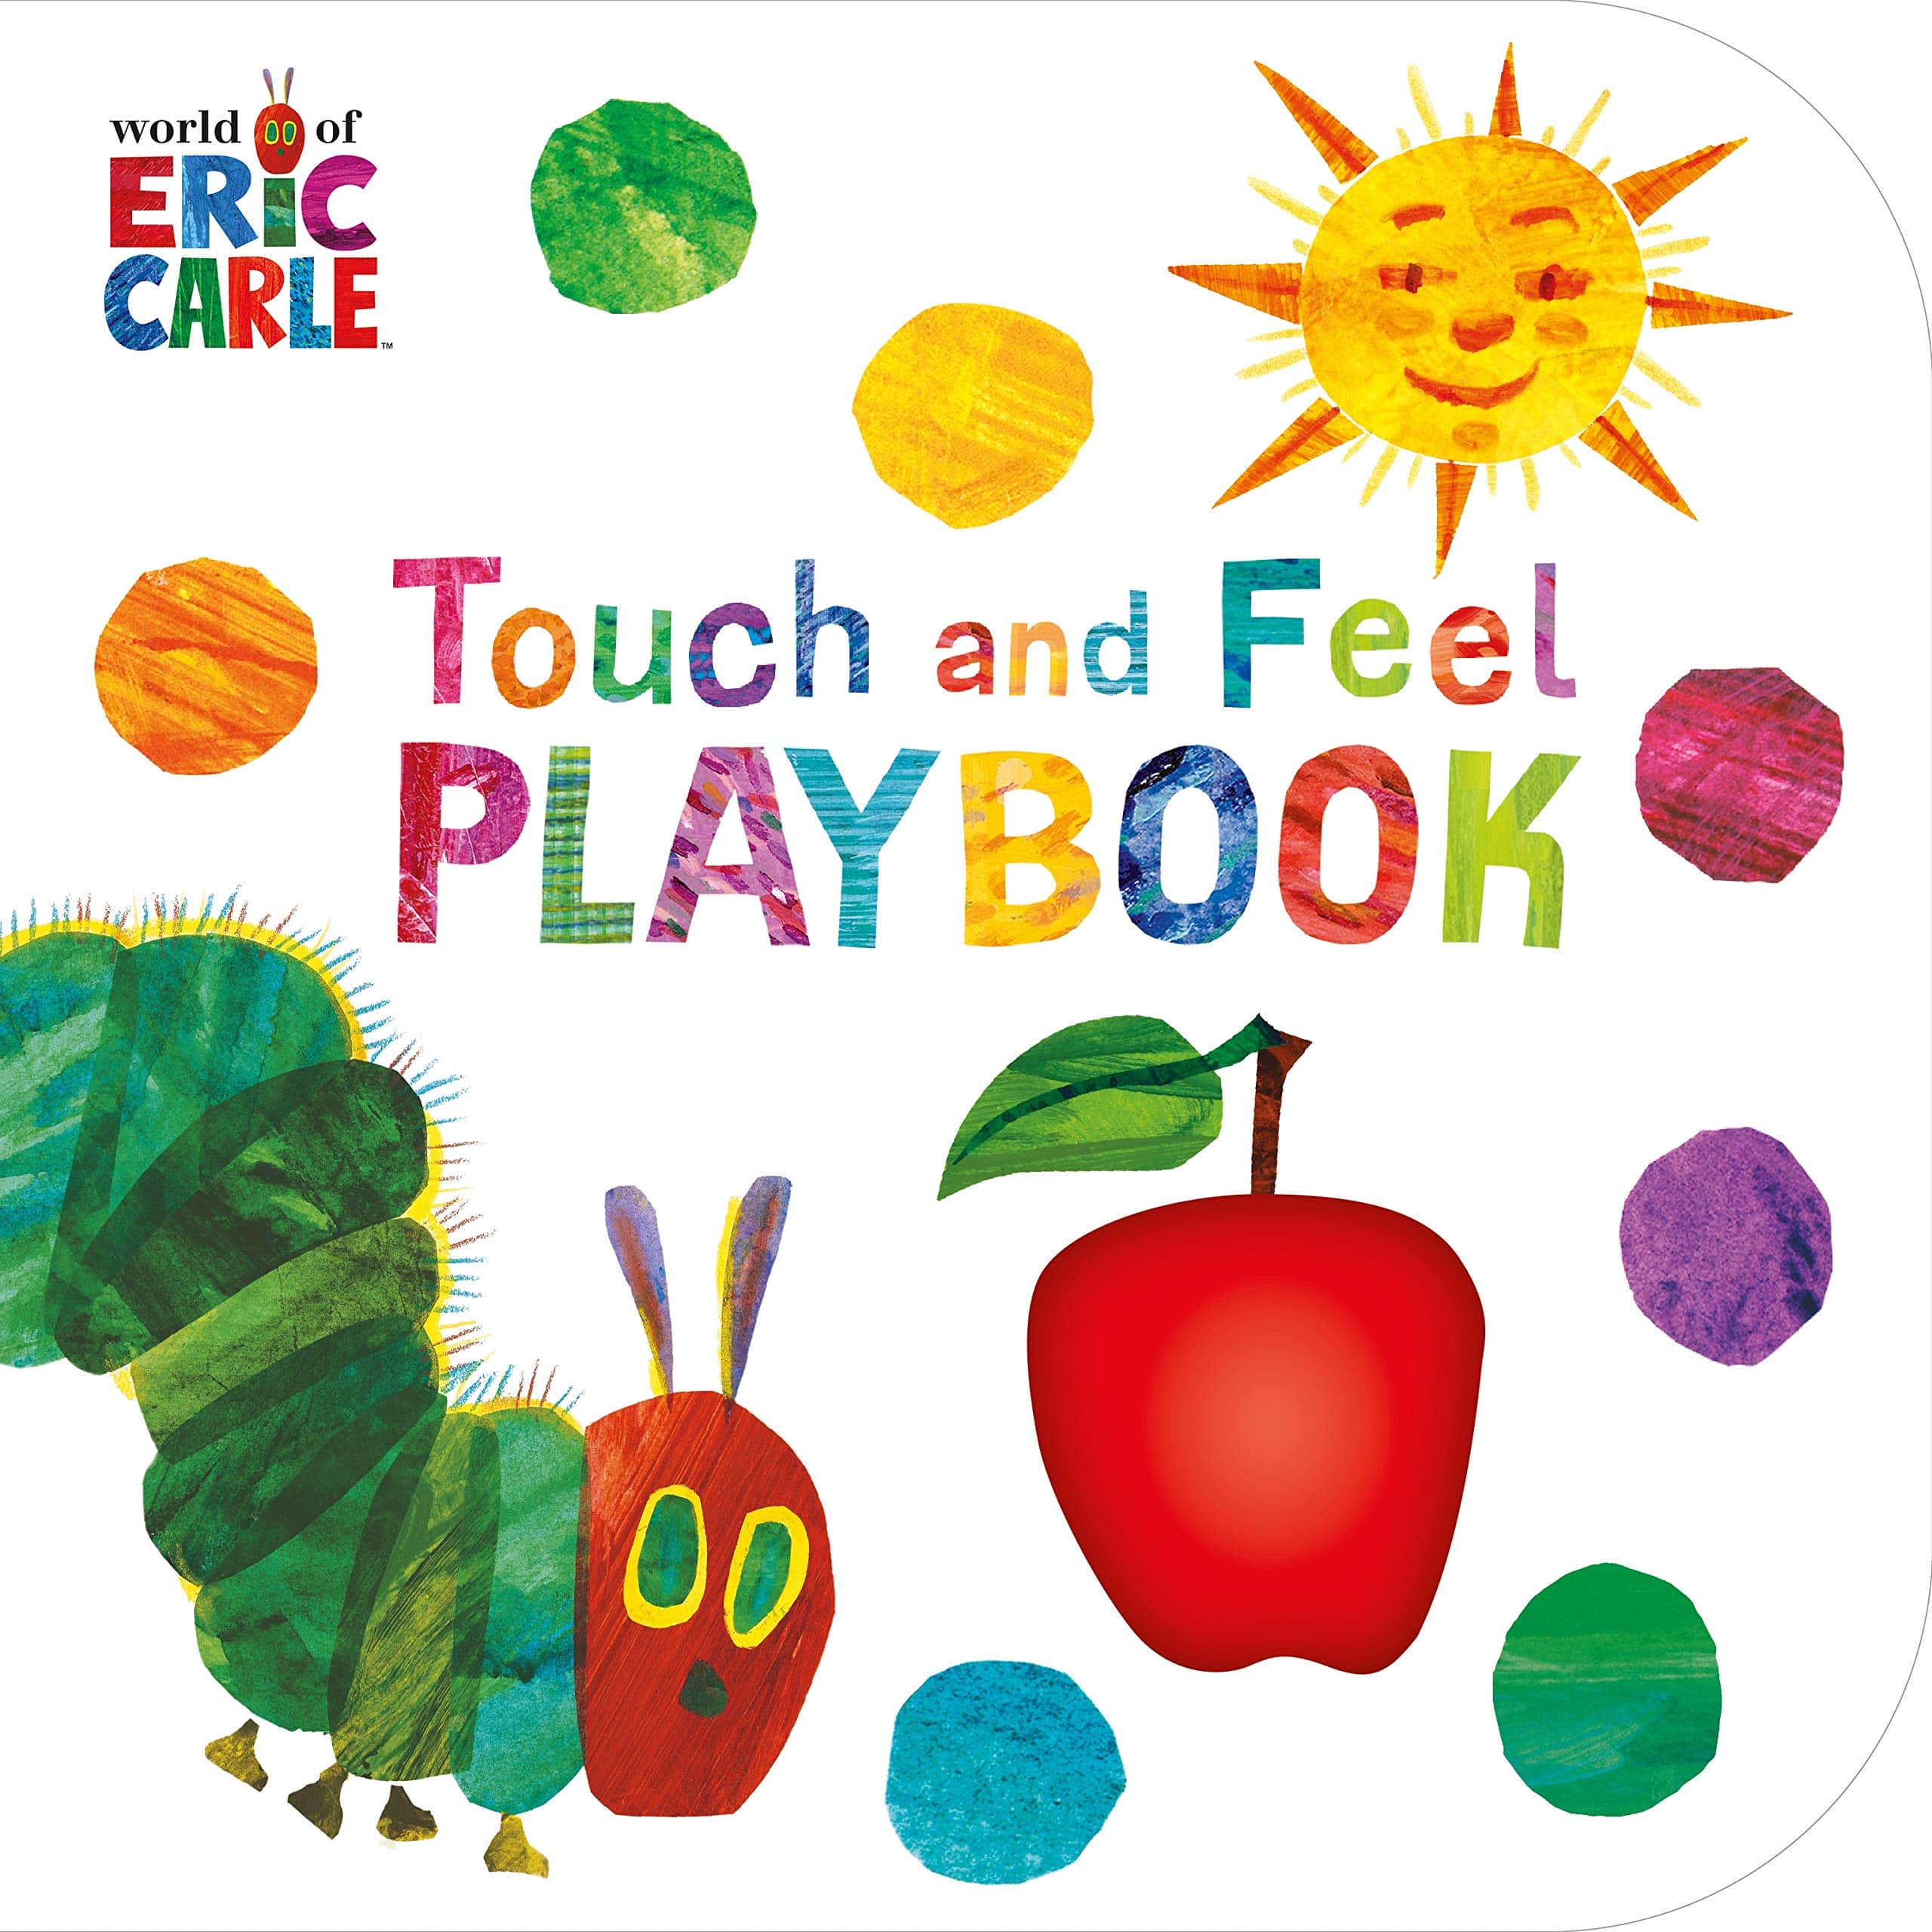 IMG : Touch and Feel Playbook